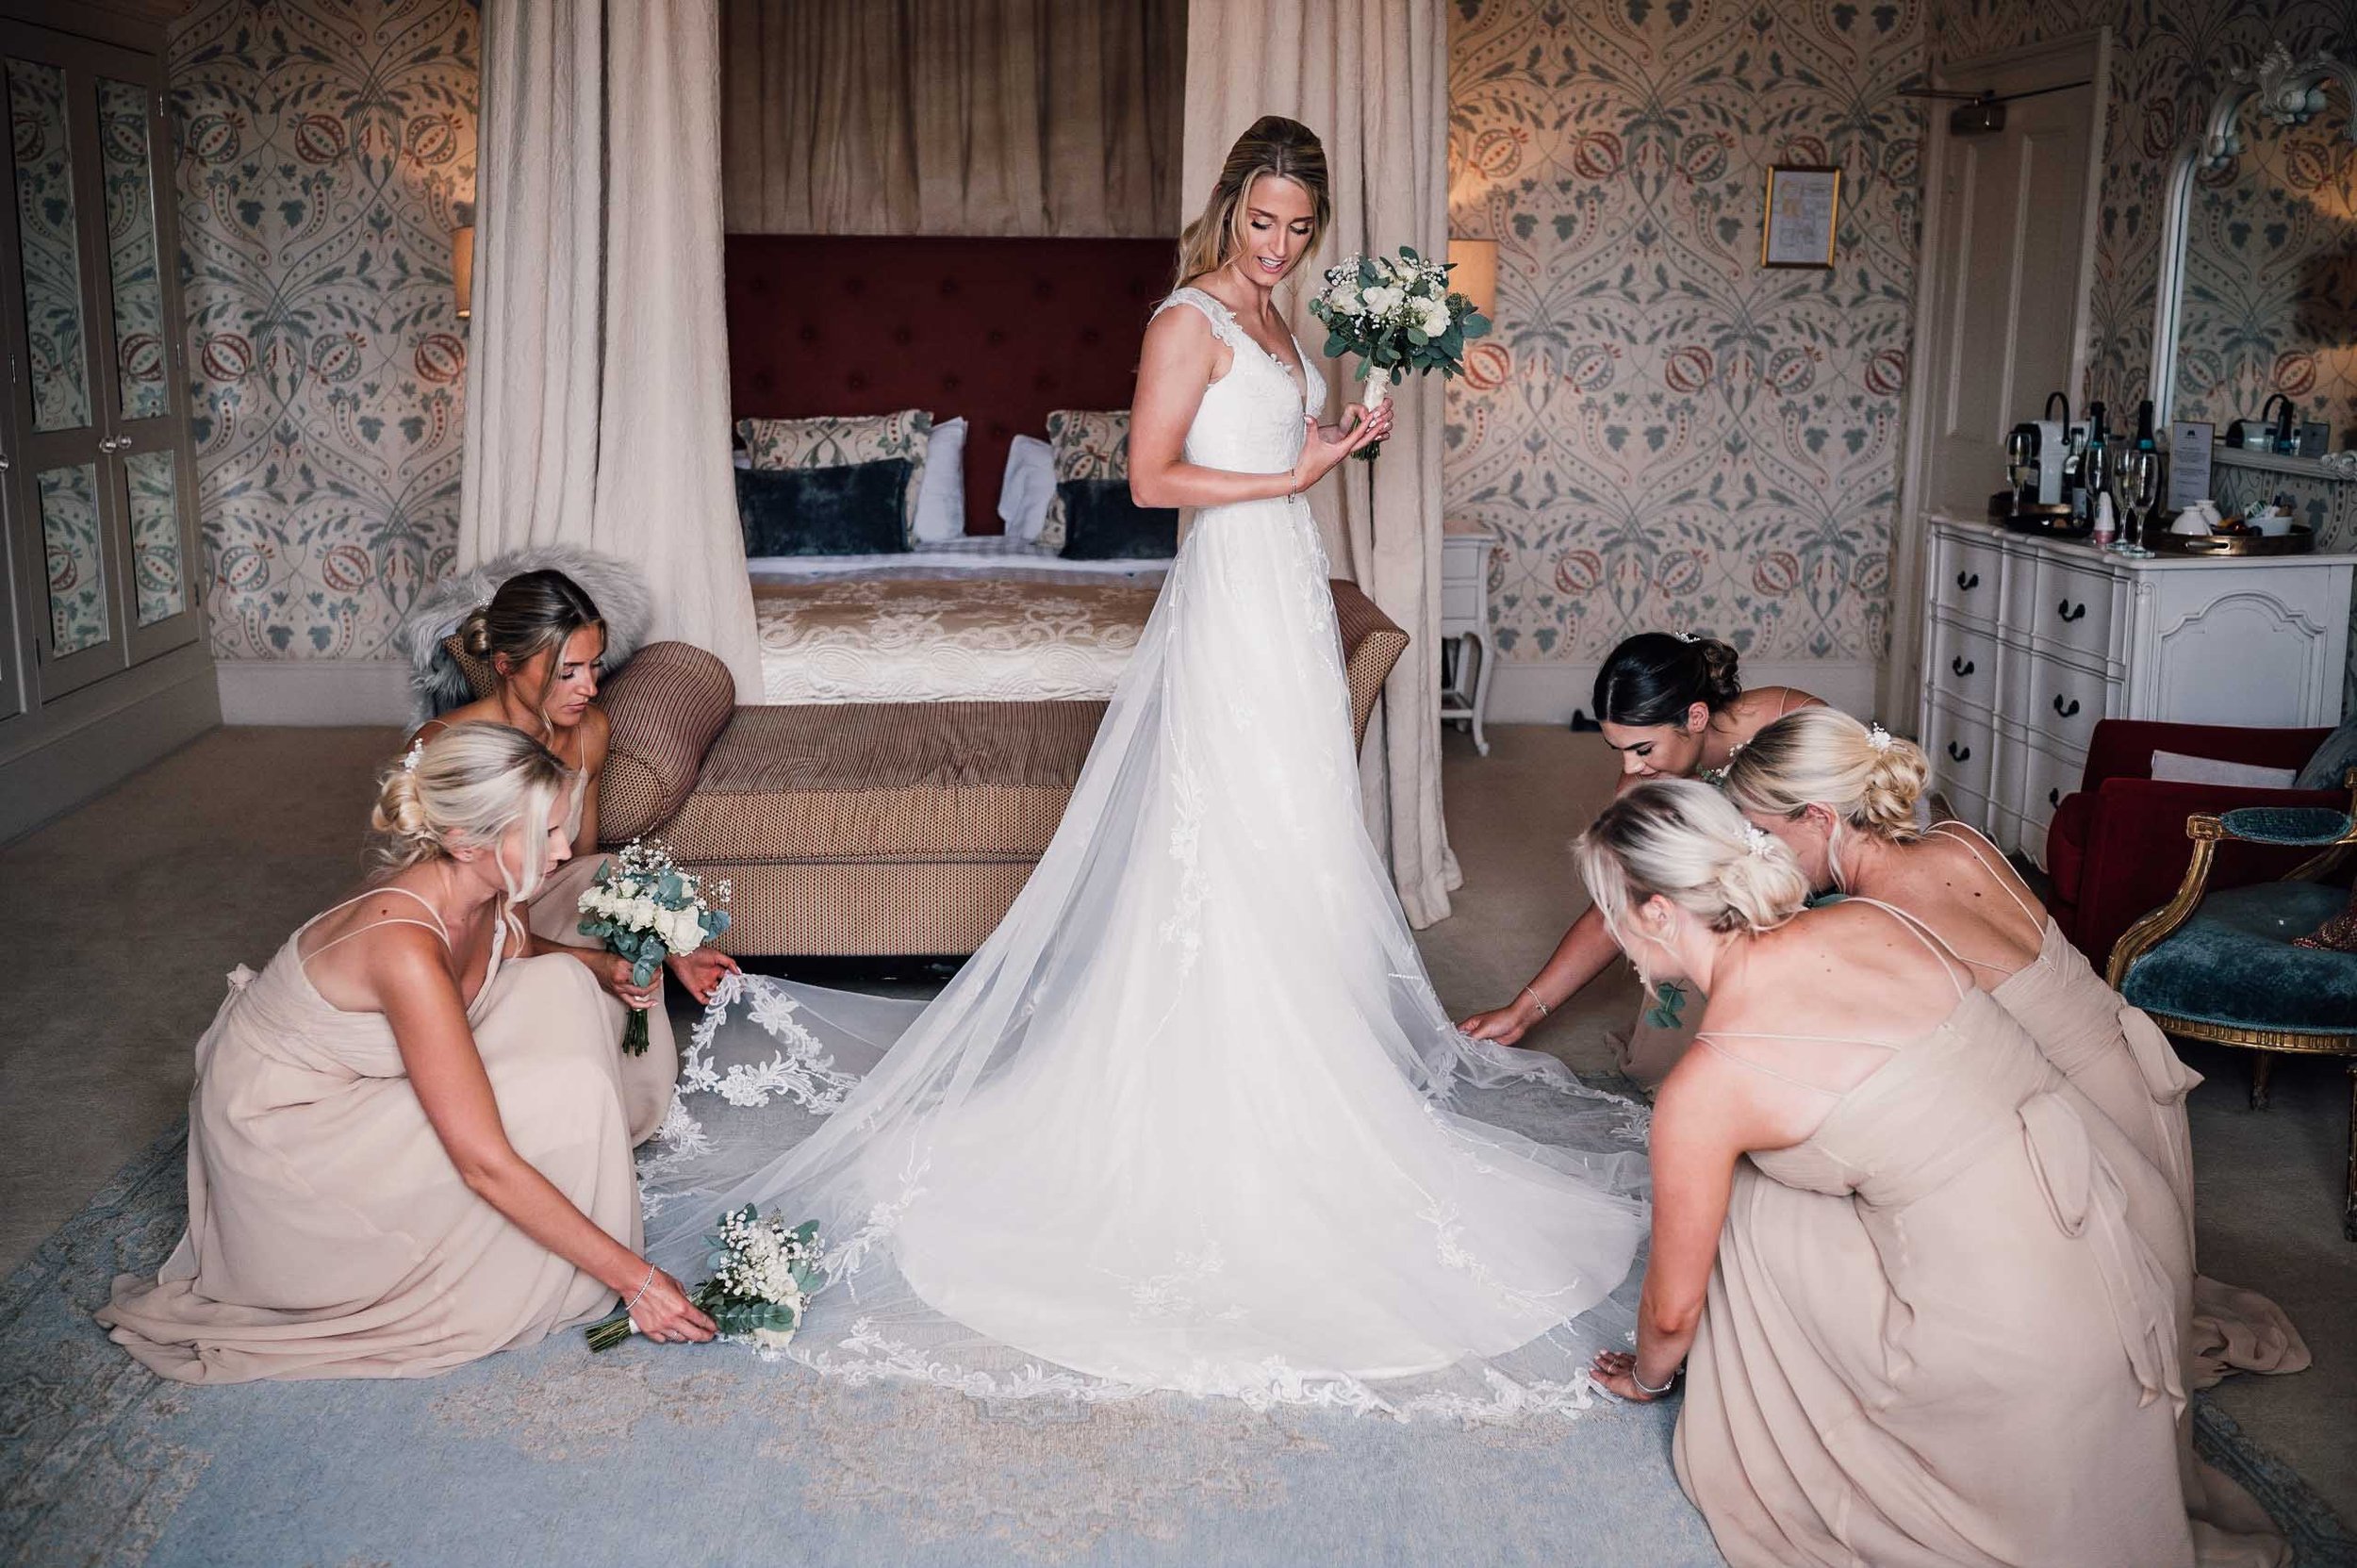 Bridesmaids helpin the bride with her wedding dress at Hodsock Priory